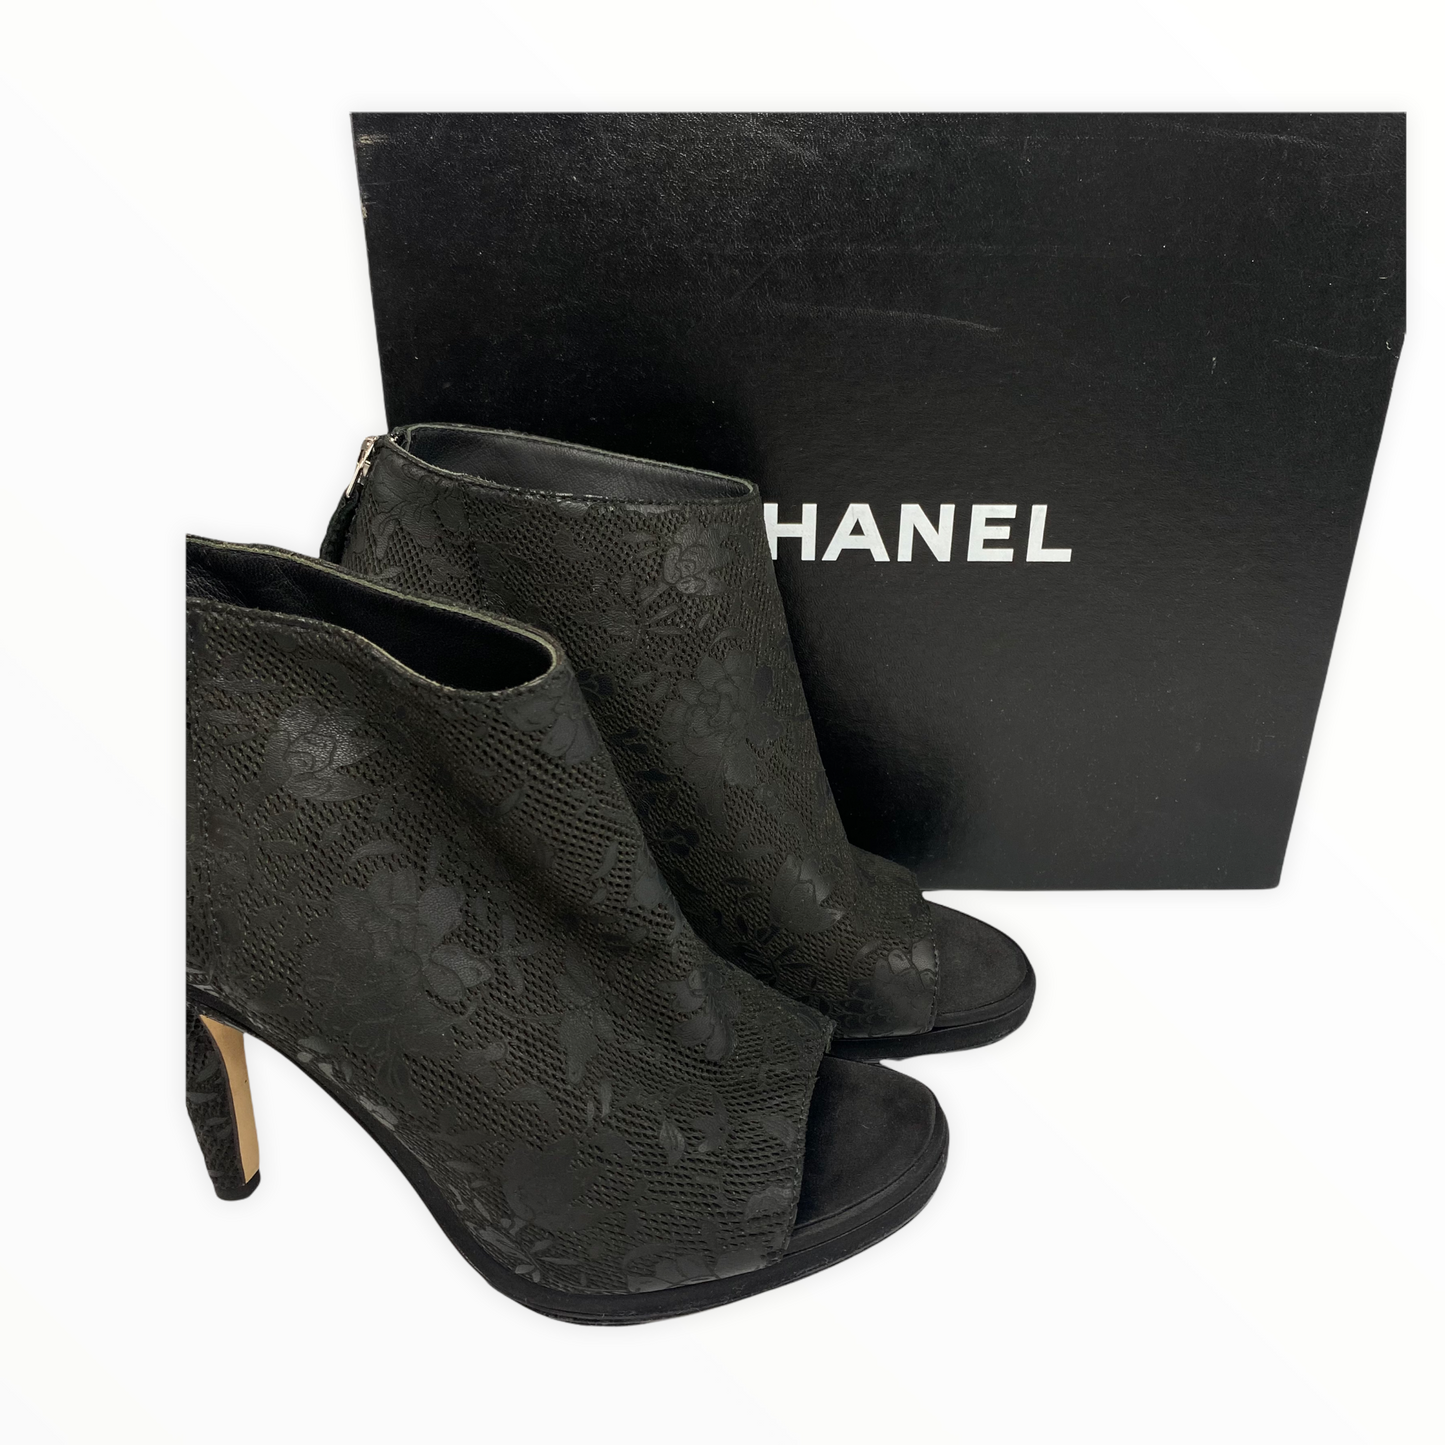 Lysis vintage Chanel open-toe boots - 39 - 2010s